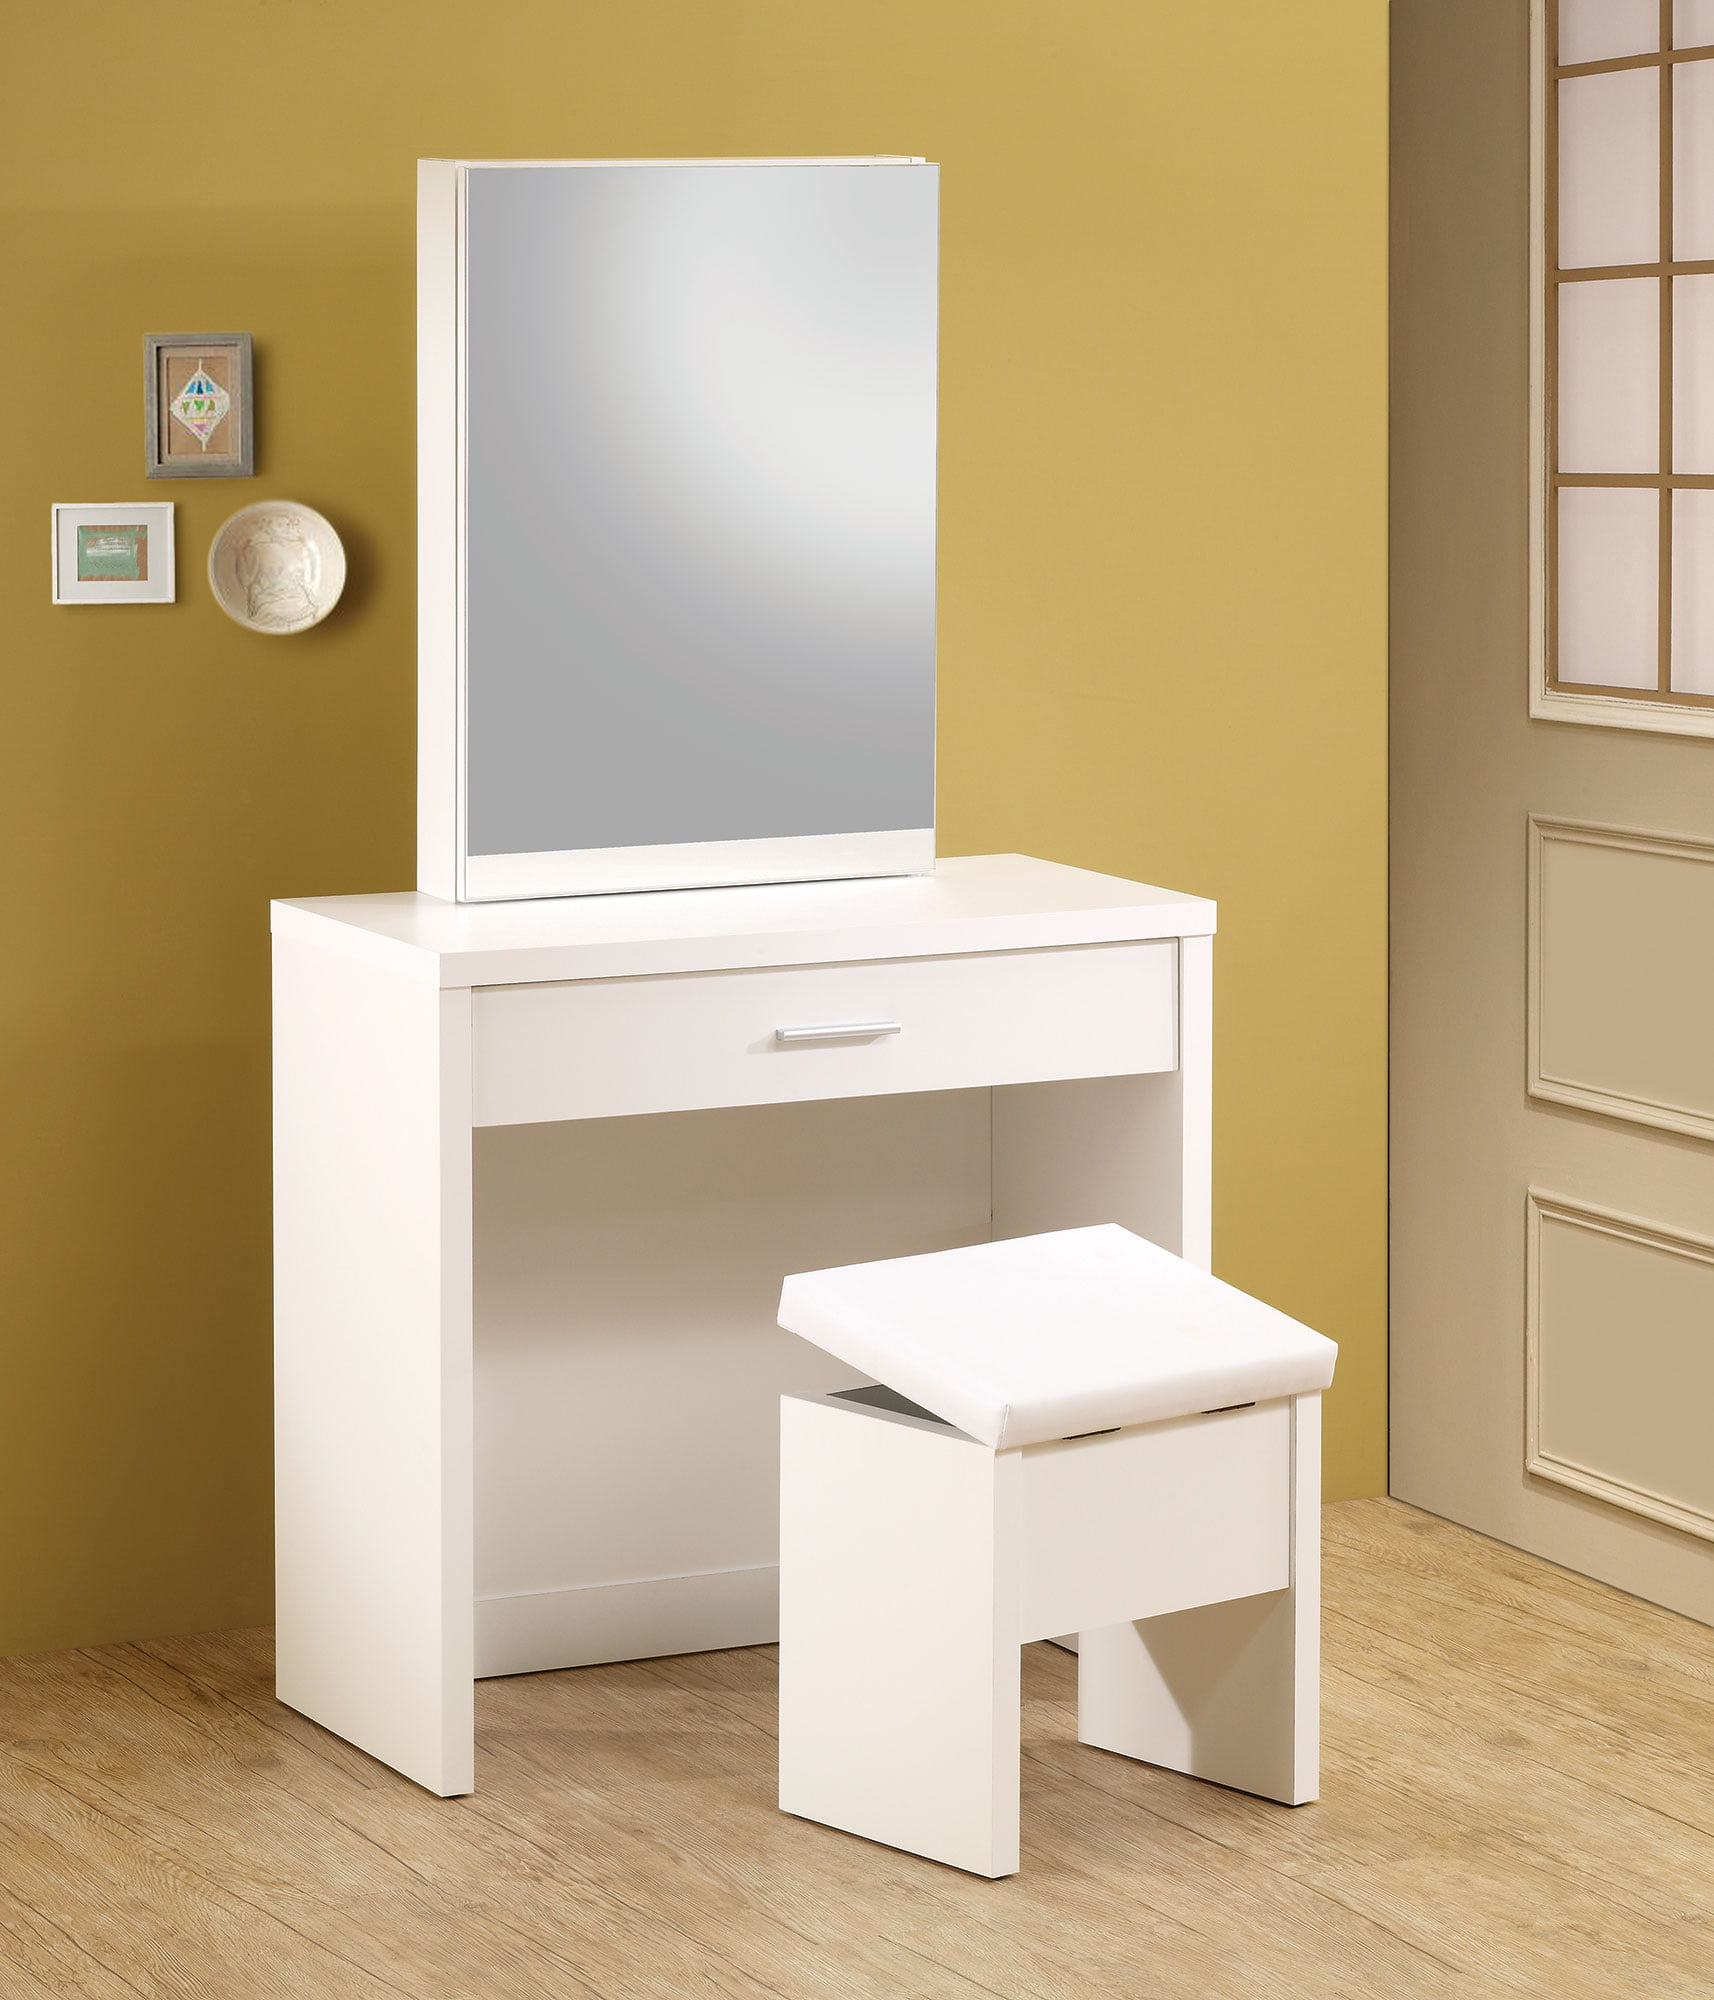 Glossy White Vanity Makeup Table Set, Contemporary White Vanity Table